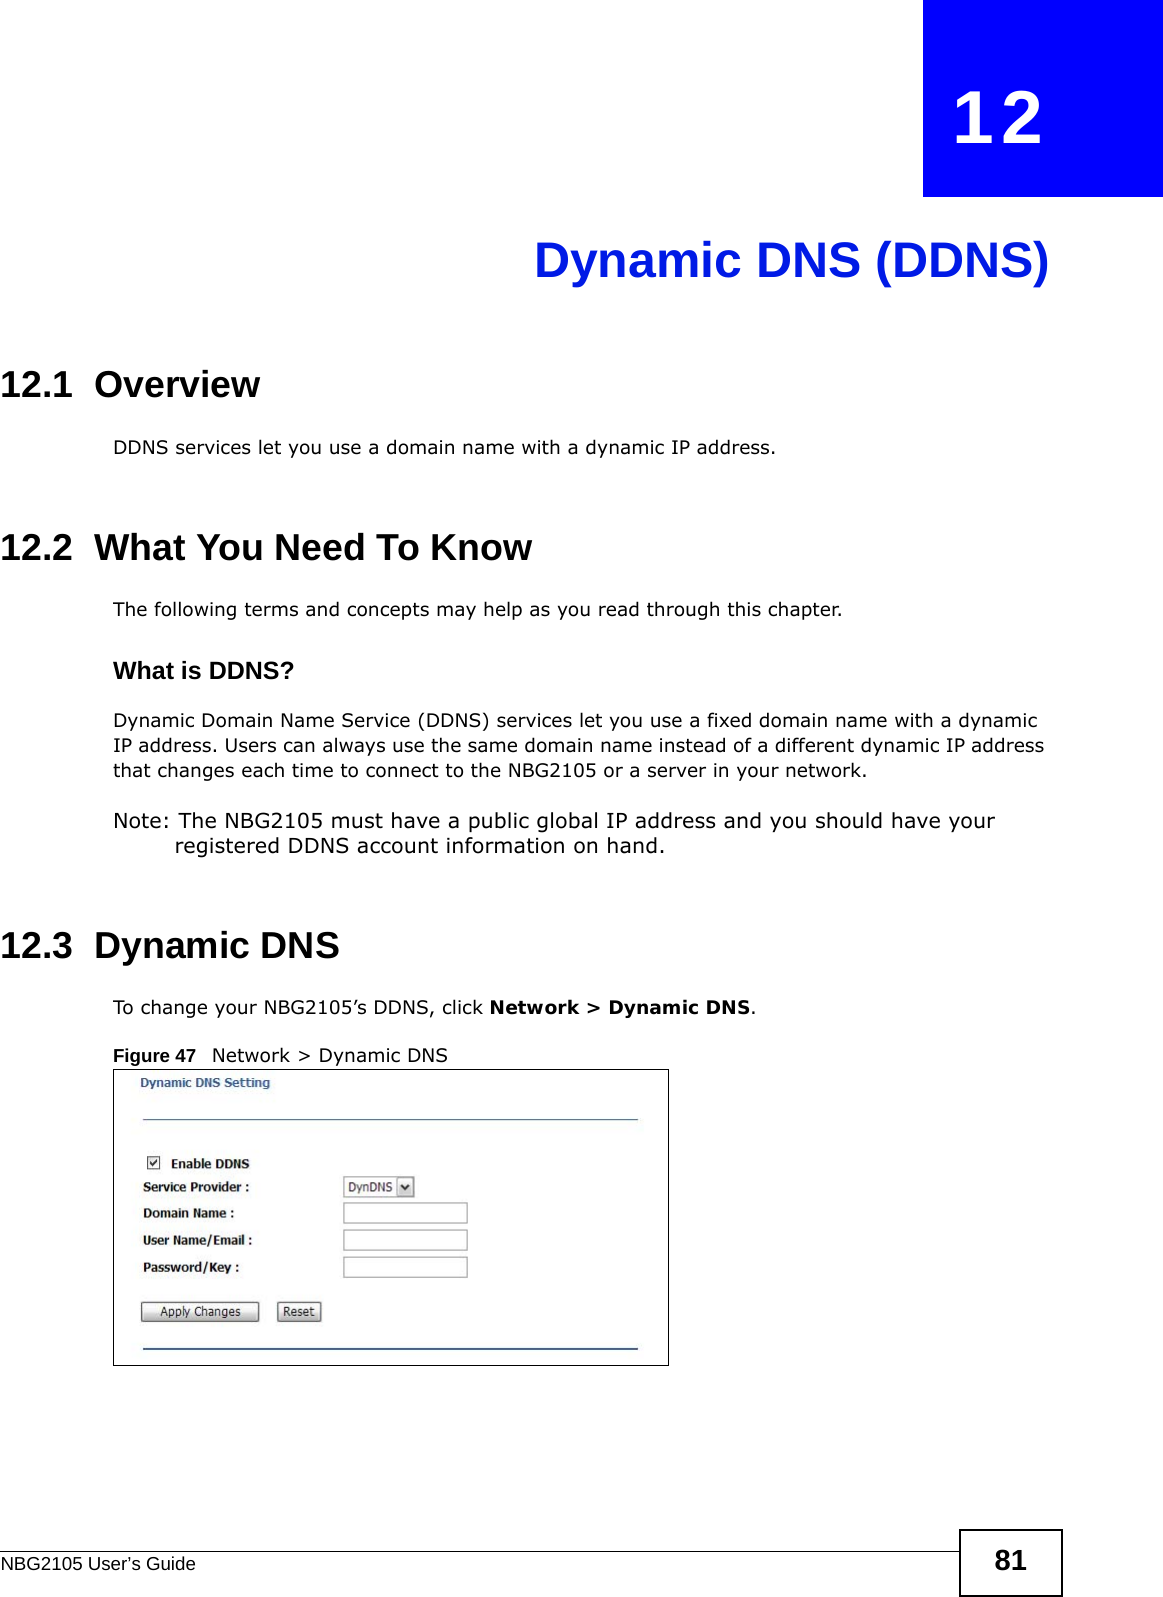 NBG2105 User’s Guide 81CHAPTER   12Dynamic DNS (DDNS)12.1  Overview DDNS services let you use a domain name with a dynamic IP address.12.2  What You Need To KnowThe following terms and concepts may help as you read through this chapter.What is DDNS?Dynamic Domain Name Service (DDNS) services let you use a fixed domain name with a dynamic IP address. Users can always use the same domain name instead of a different dynamic IP address that changes each time to connect to the NBG2105 or a server in your network.Note: The NBG2105 must have a public global IP address and you should have your registered DDNS account information on hand.12.3  Dynamic DNSTo change your NBG2105’s DDNS, click Network &gt; Dynamic DNS.Figure 47   Network &gt; Dynamic DNS 